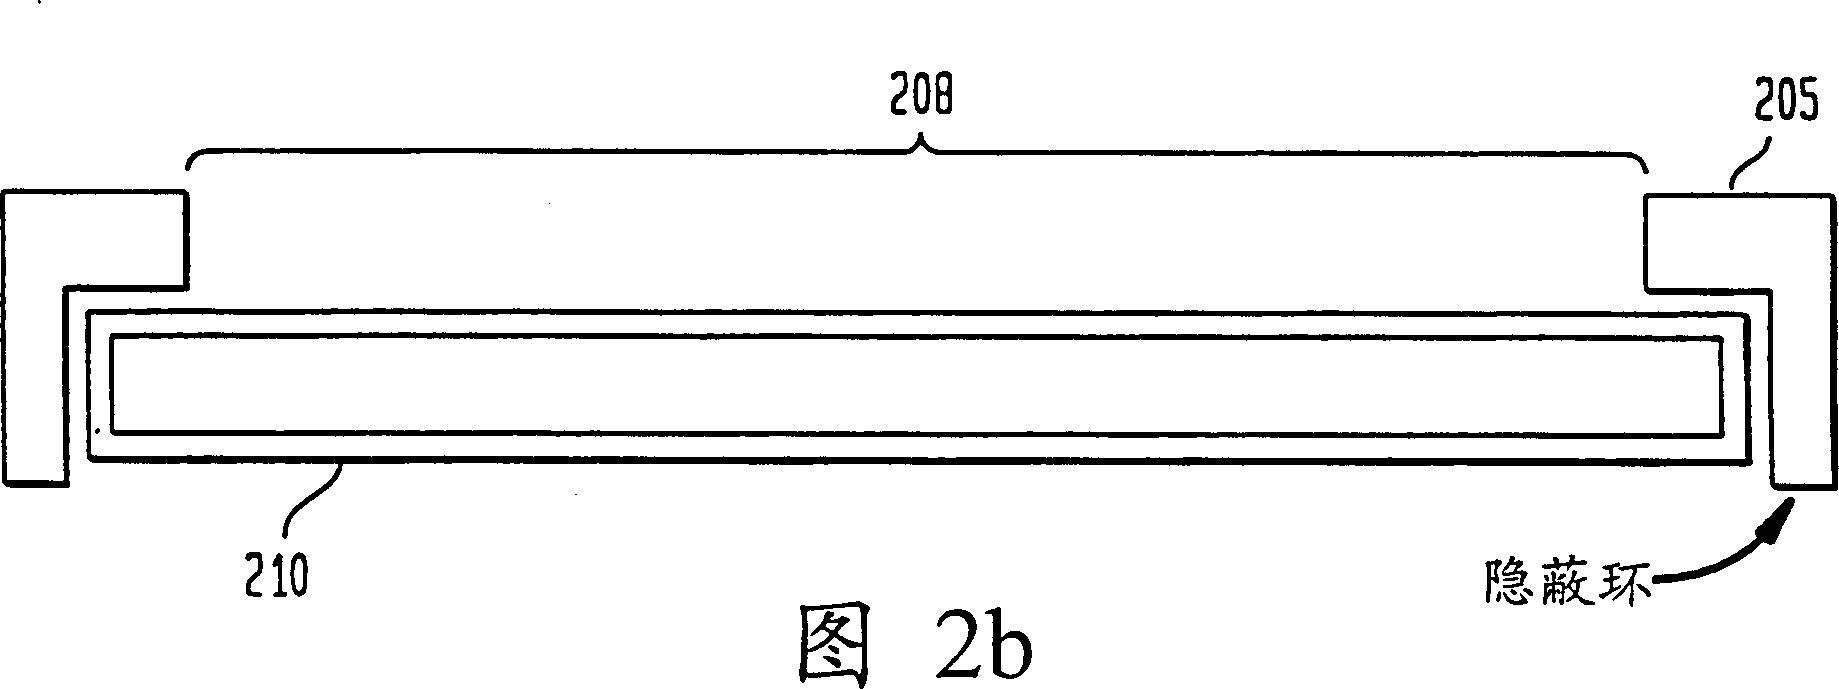 Reduction of black silicon in semiconductor manufacture